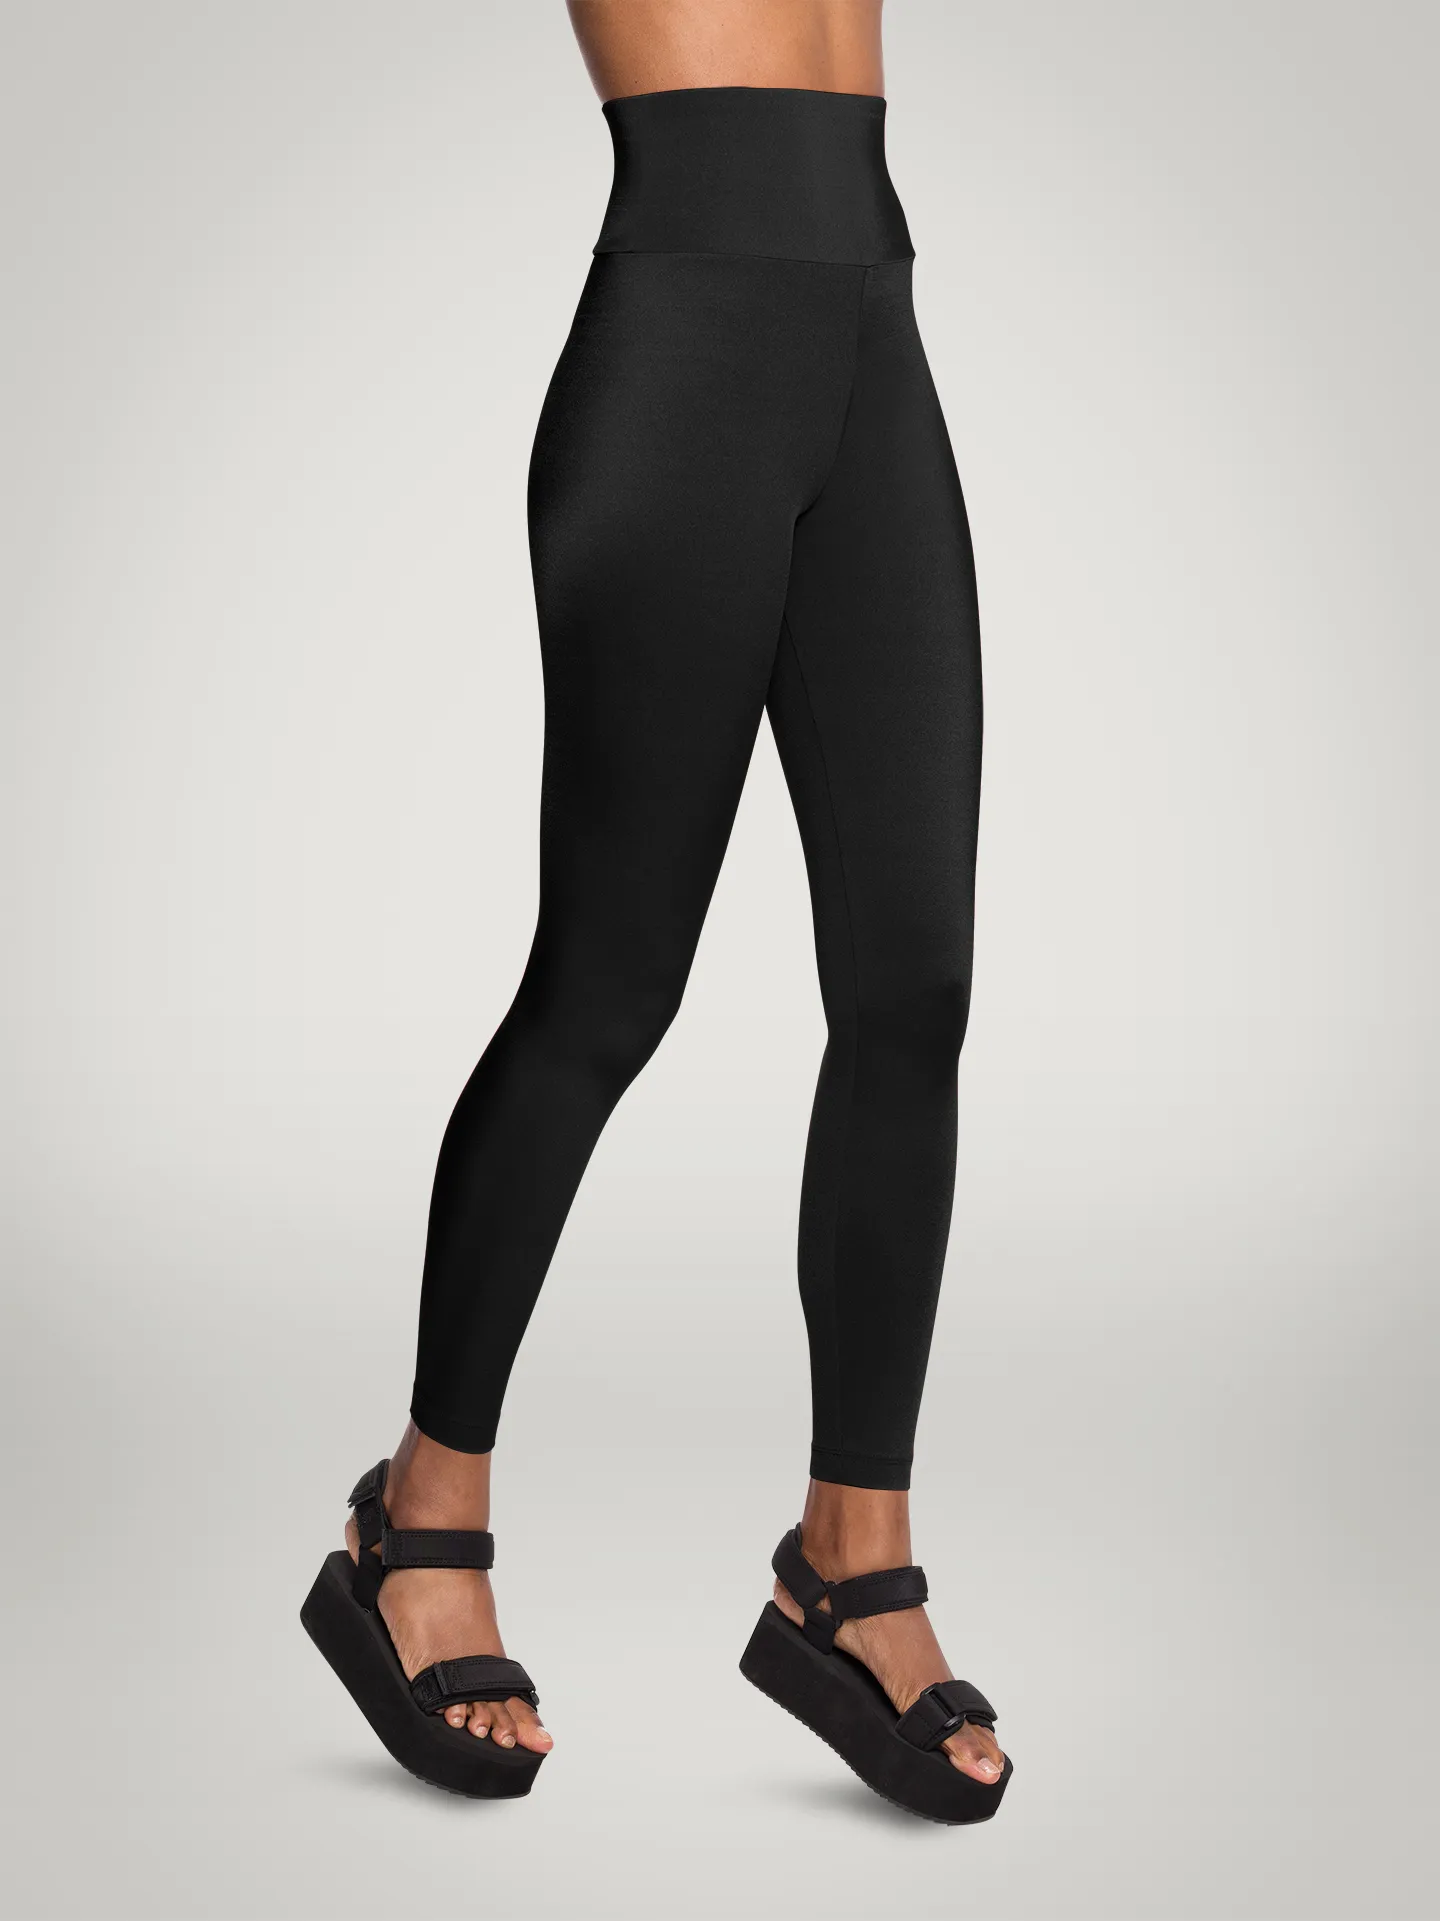 Wolford - The Workout Leggings, Donna, black, Taglia: M